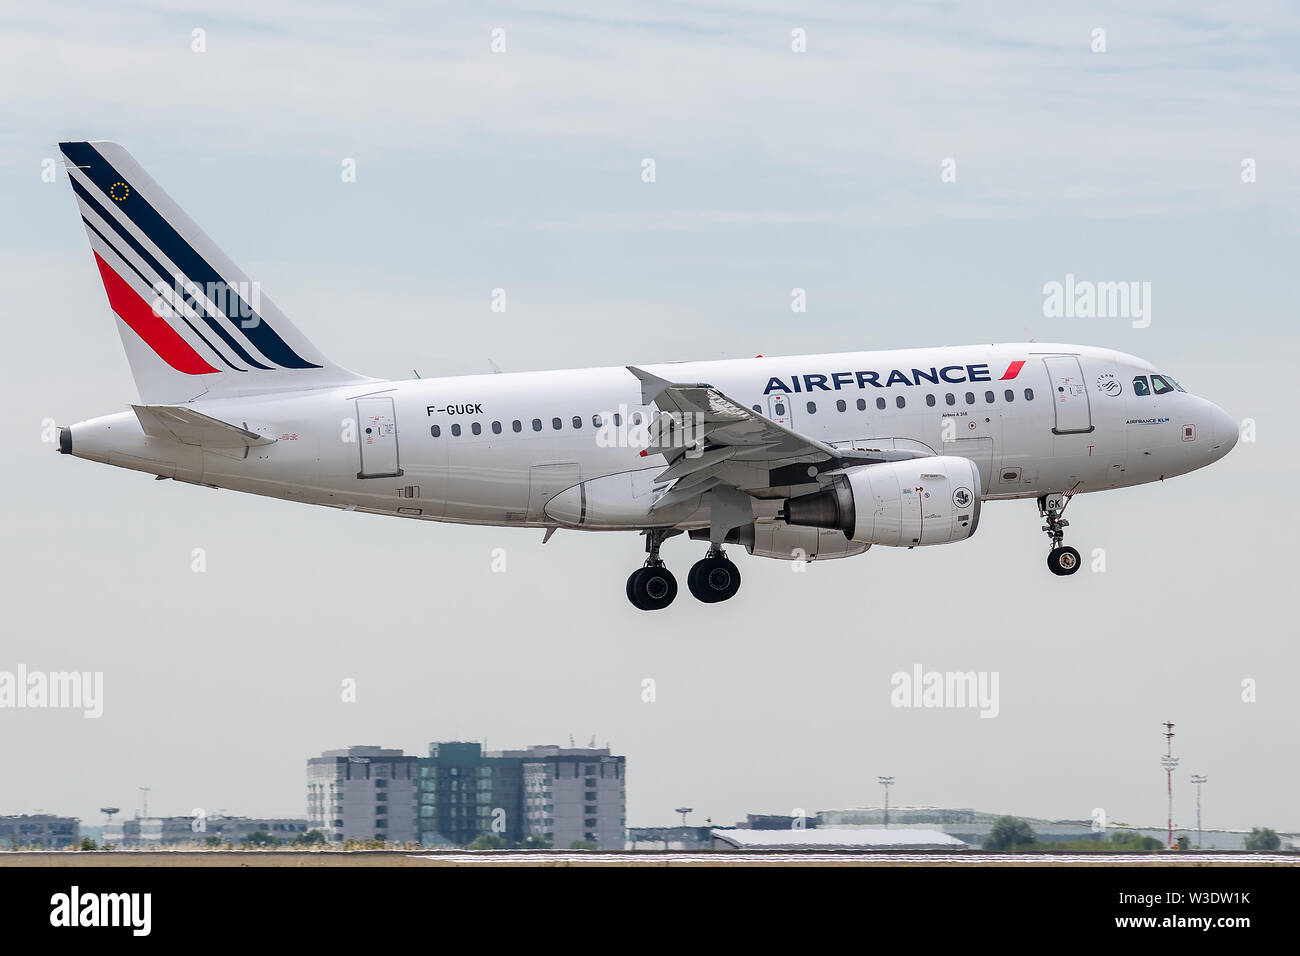 F-GUGK, July 11, 2019, Airbus A318-111-2601 landing on the runways of the Paris Roissy Charles de Gaulle airport at the end of flight Air France AF773 Stock Photo